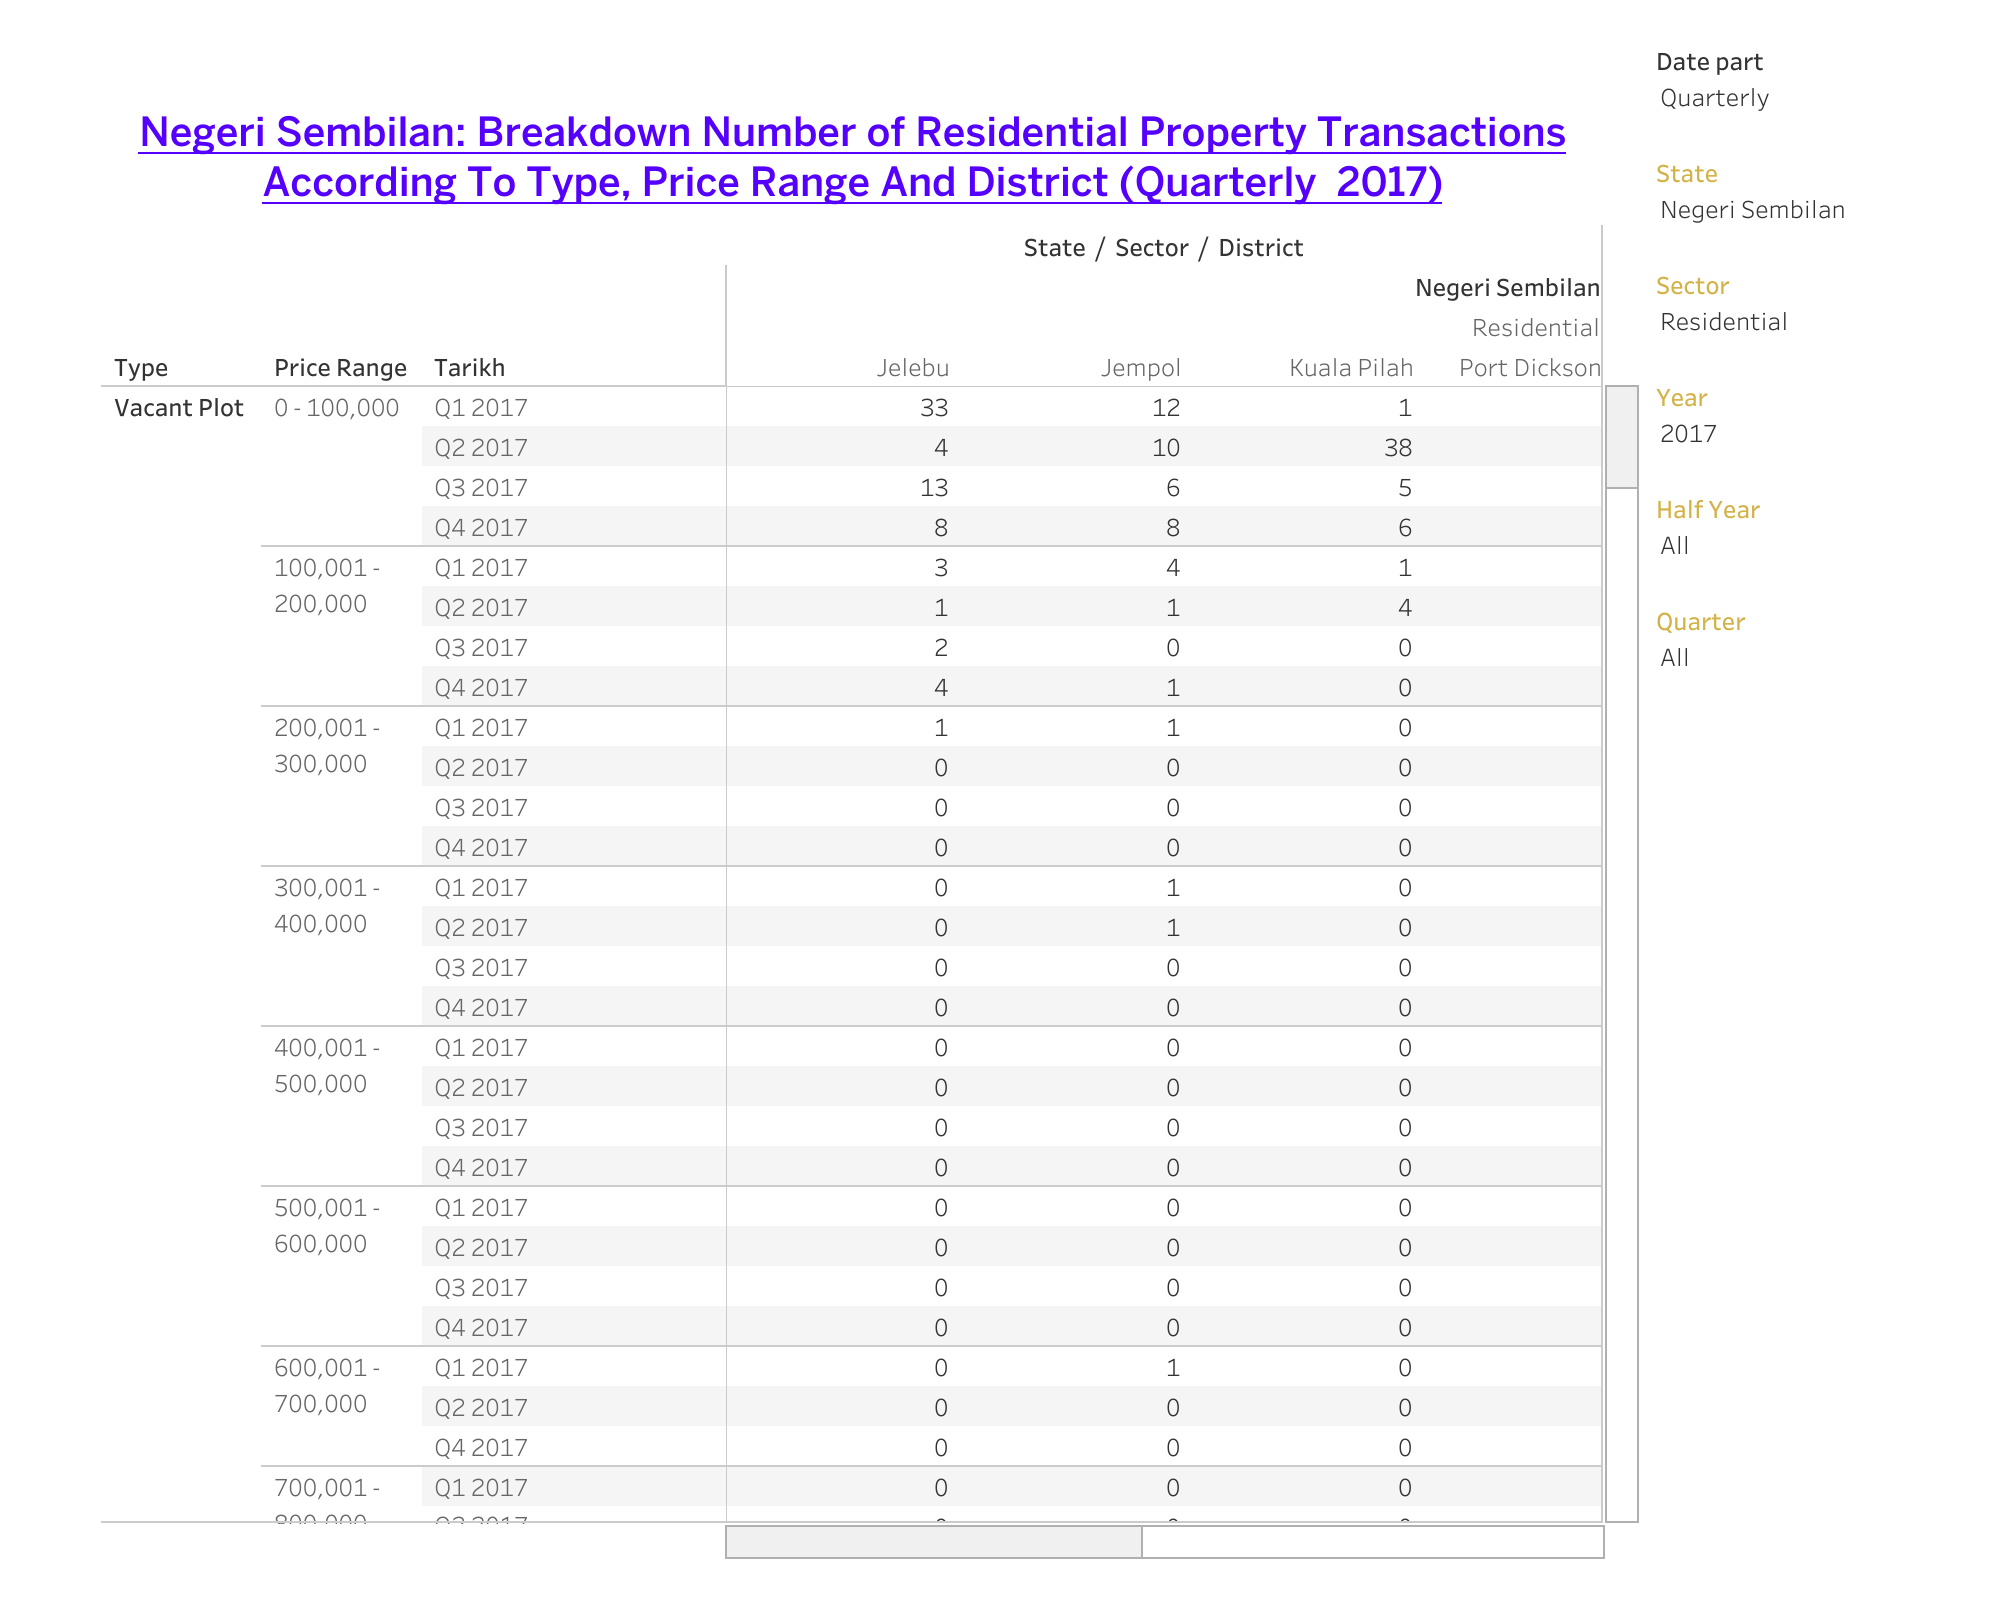 STATE : Breakdown Number of Property Transactions According To Type, Price Range And District